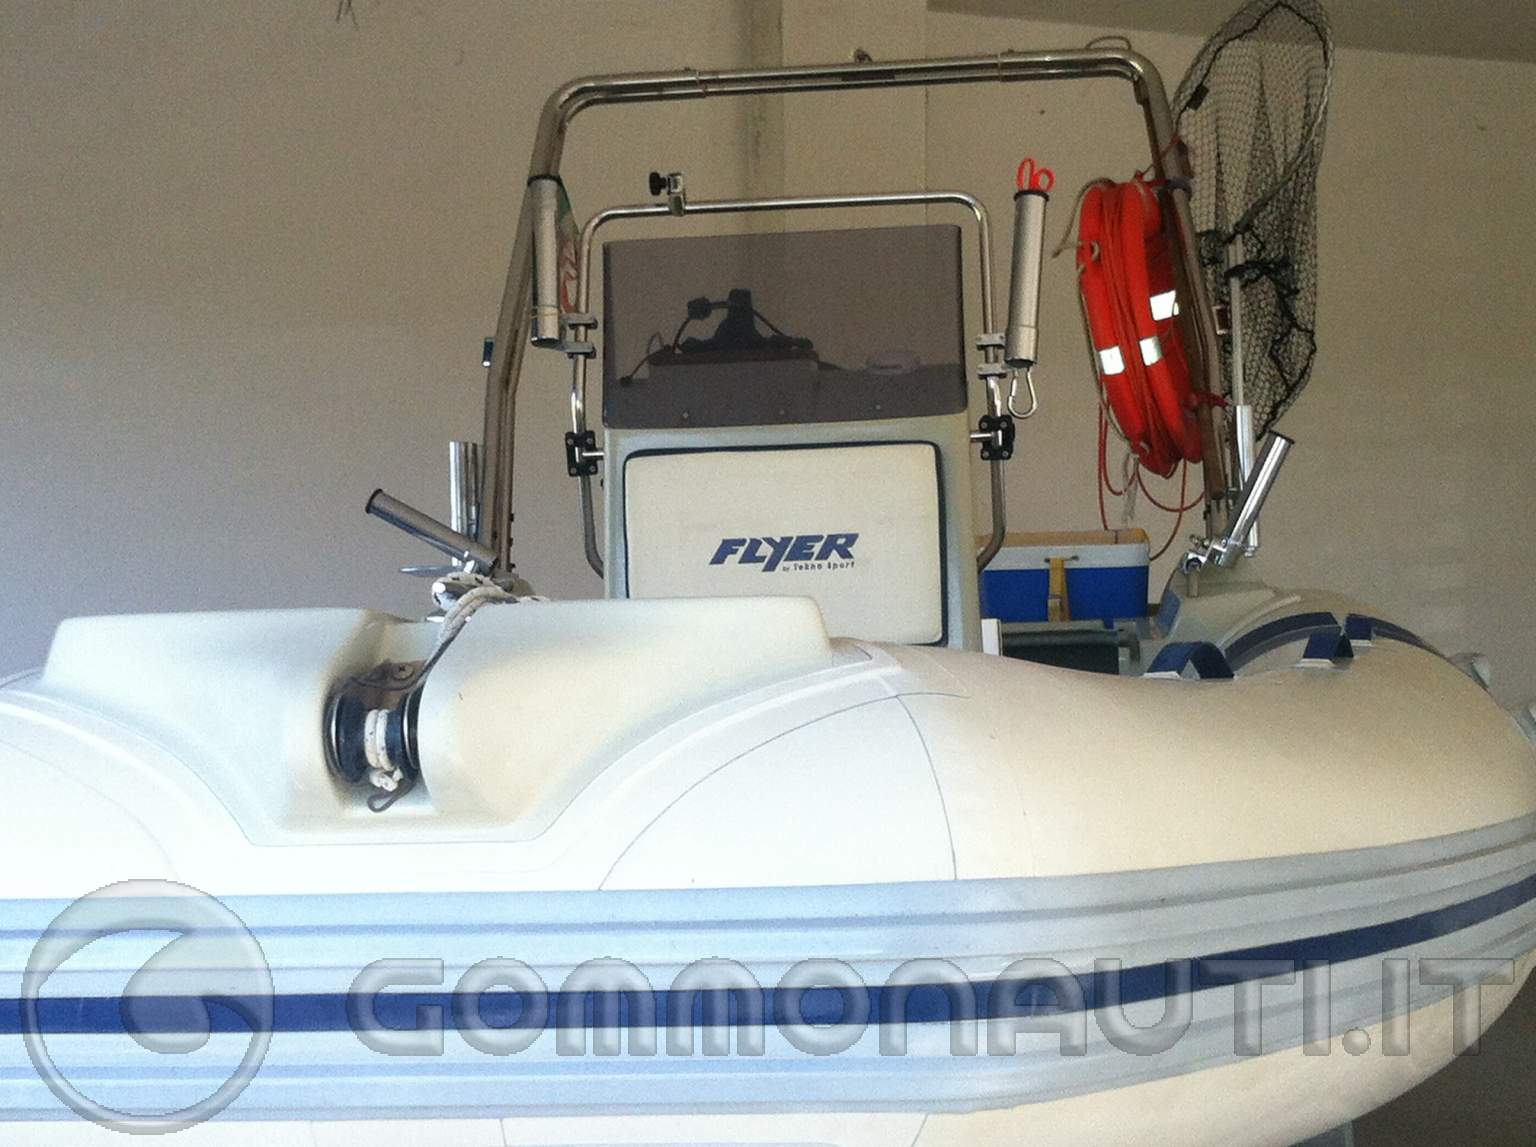 Gommone Flyer 484 Evinrude 90 rams 90 HP 2 tempi